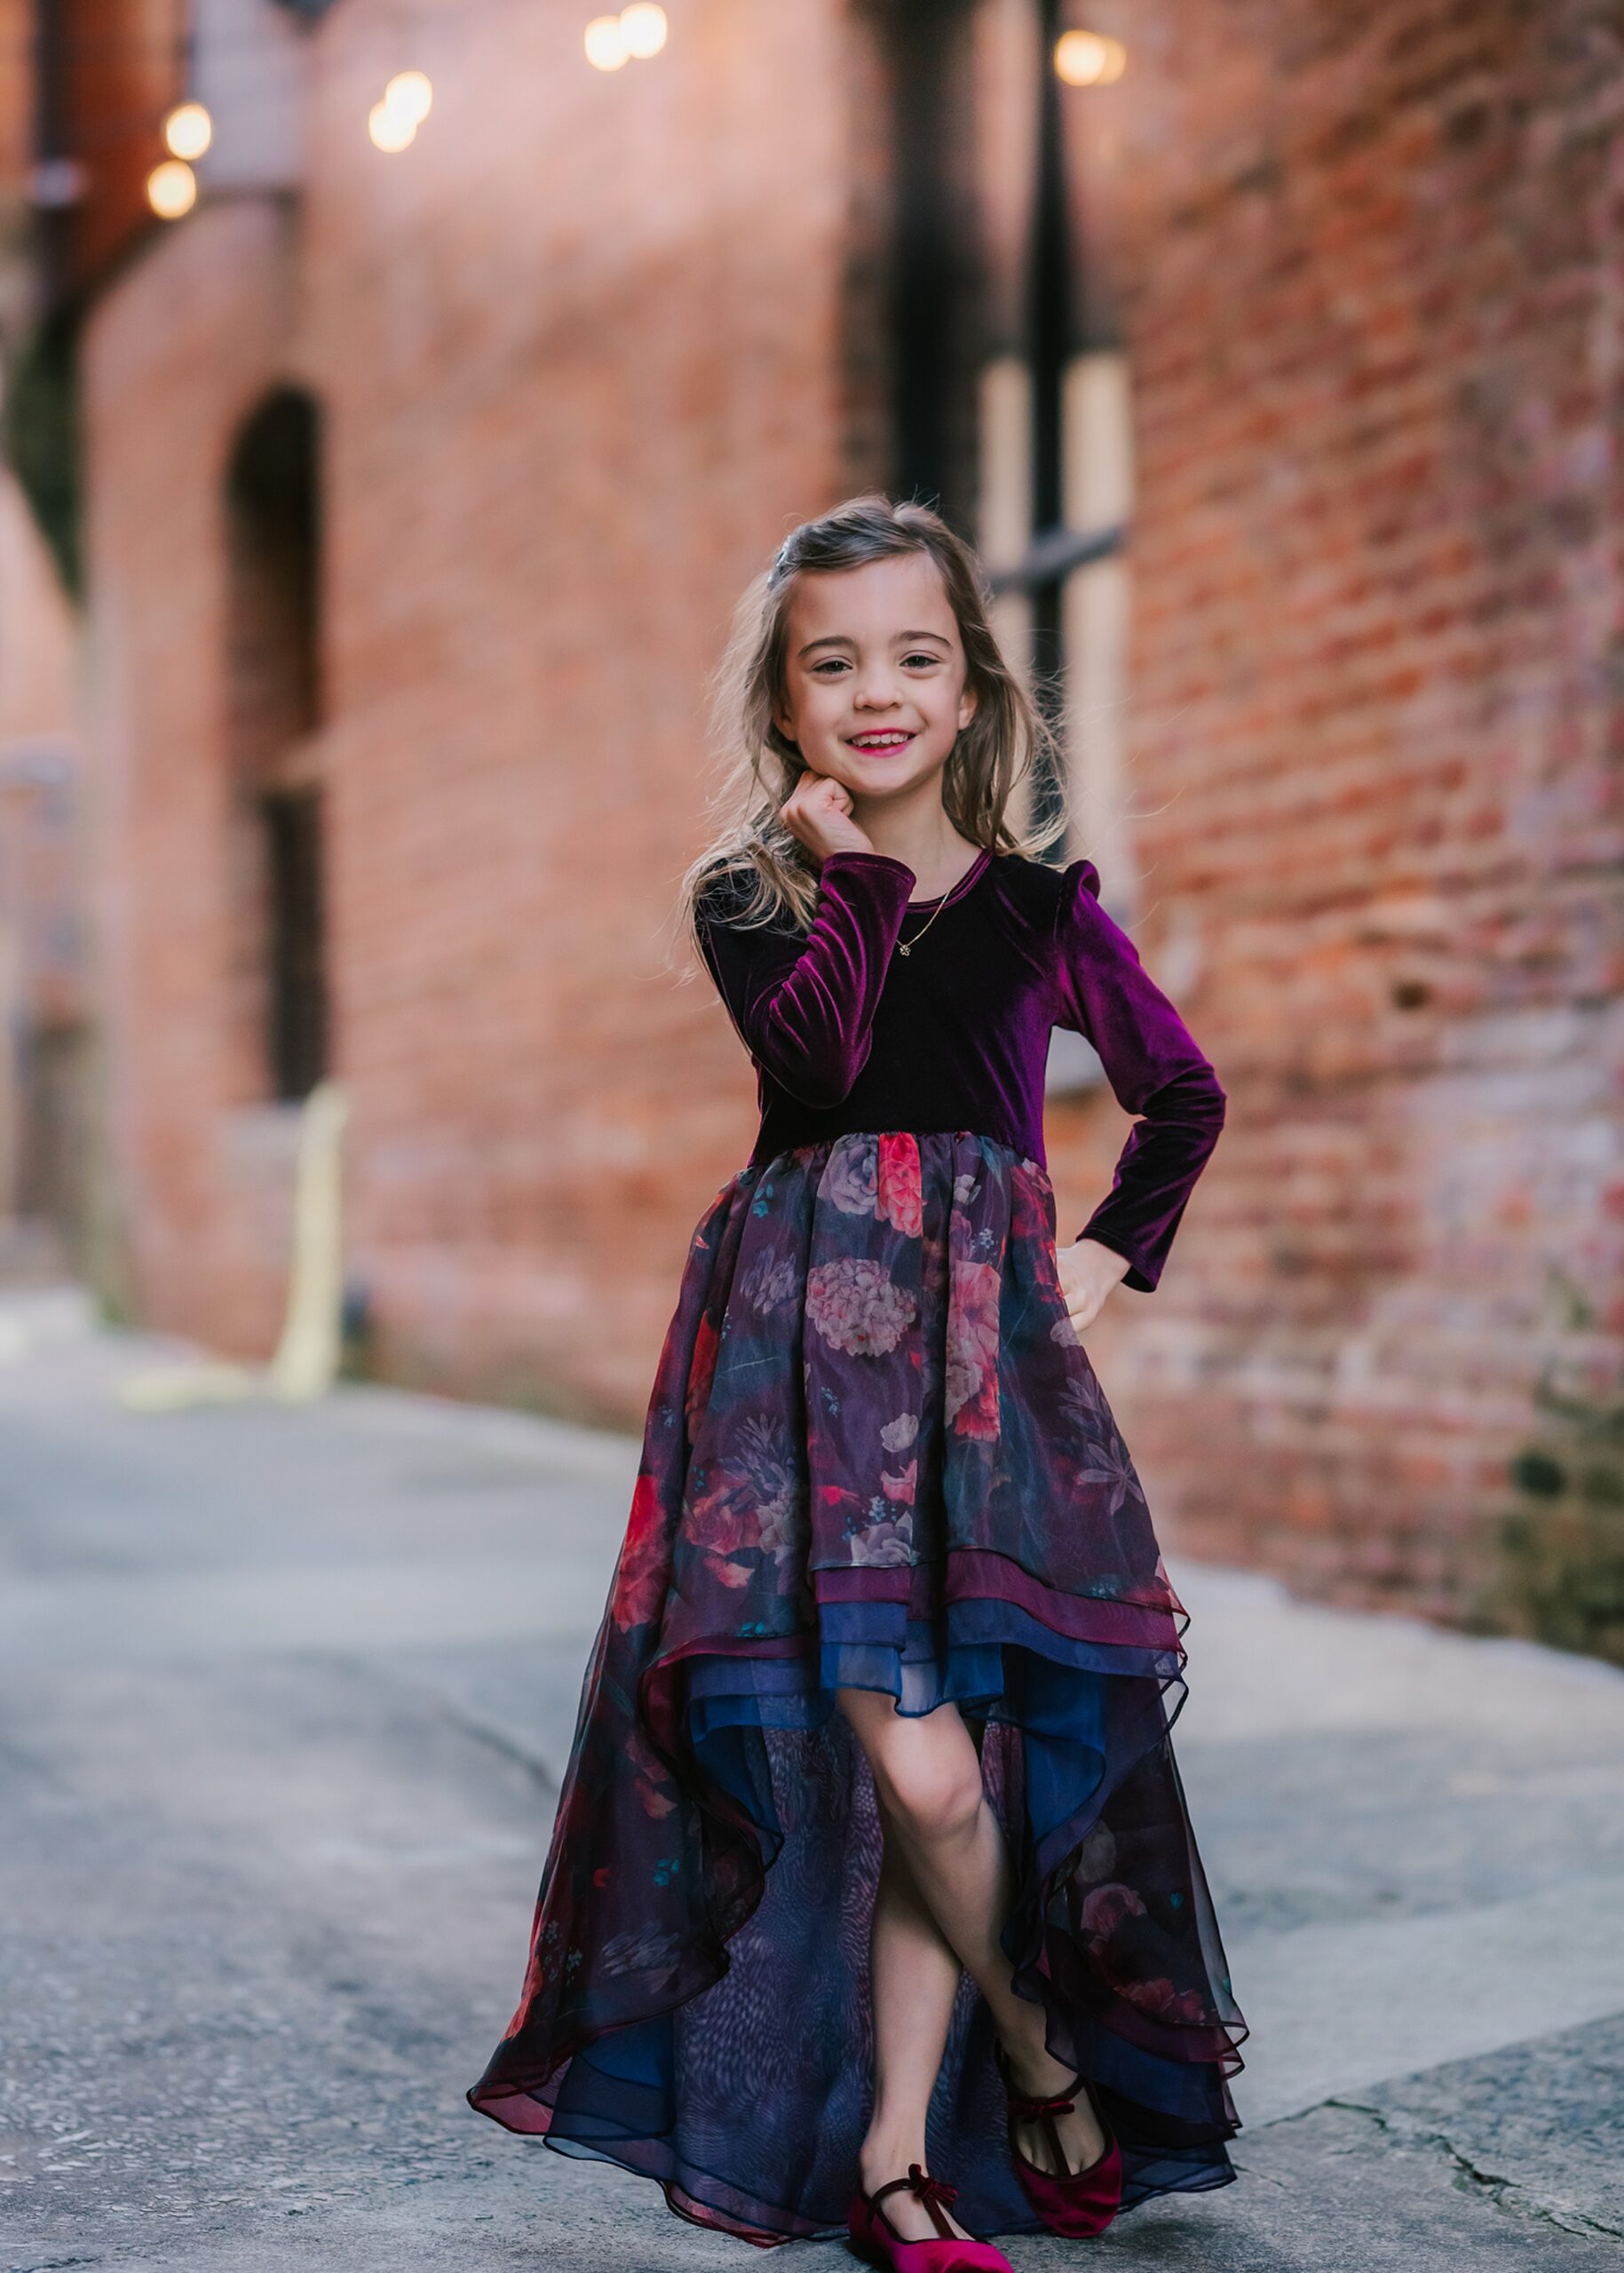 A young girl in a purple dance dress stands in a alley with a brick building raleigh youth sports